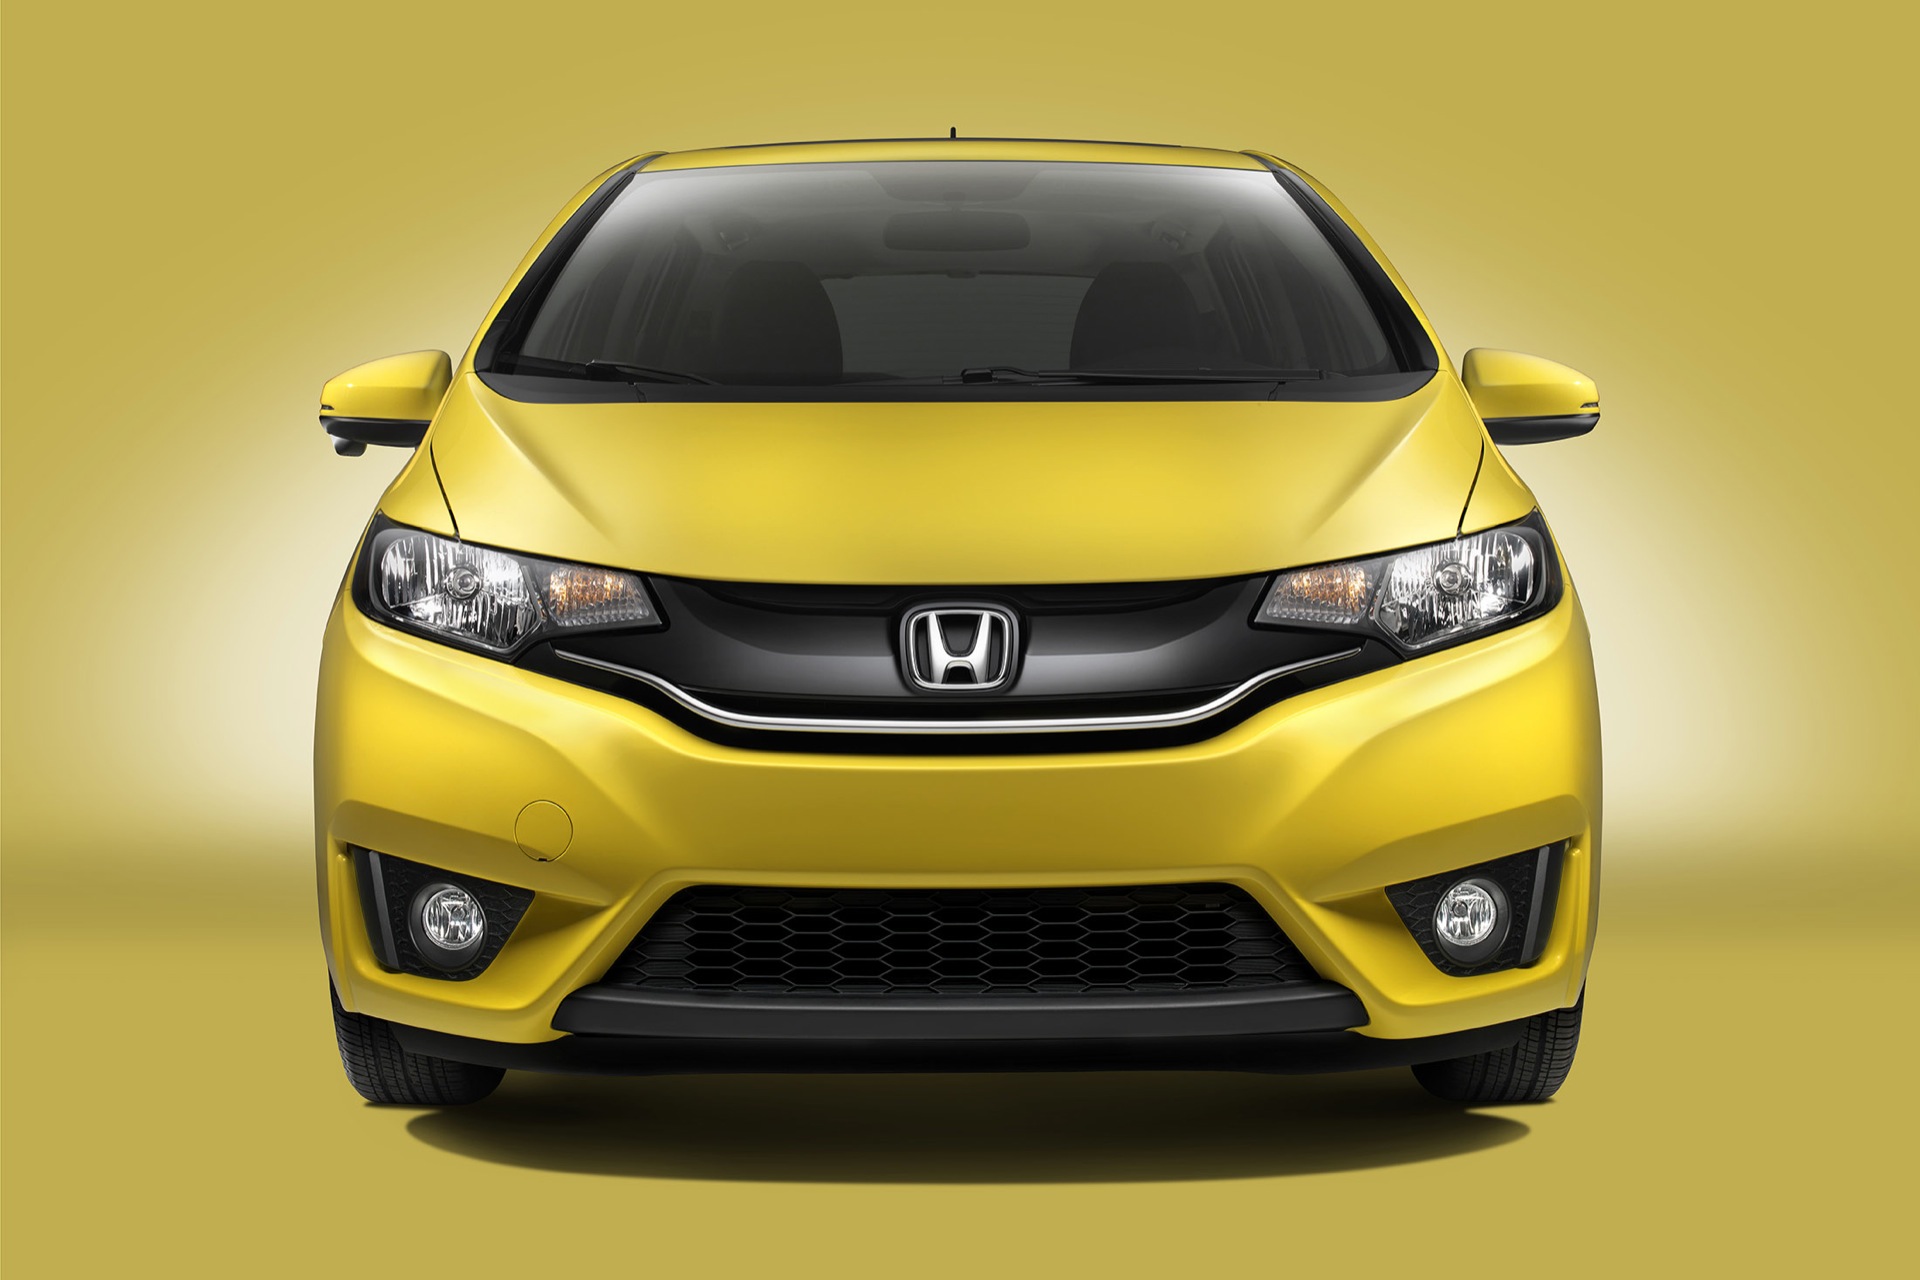 What are some typical problems with the Honda Fit?